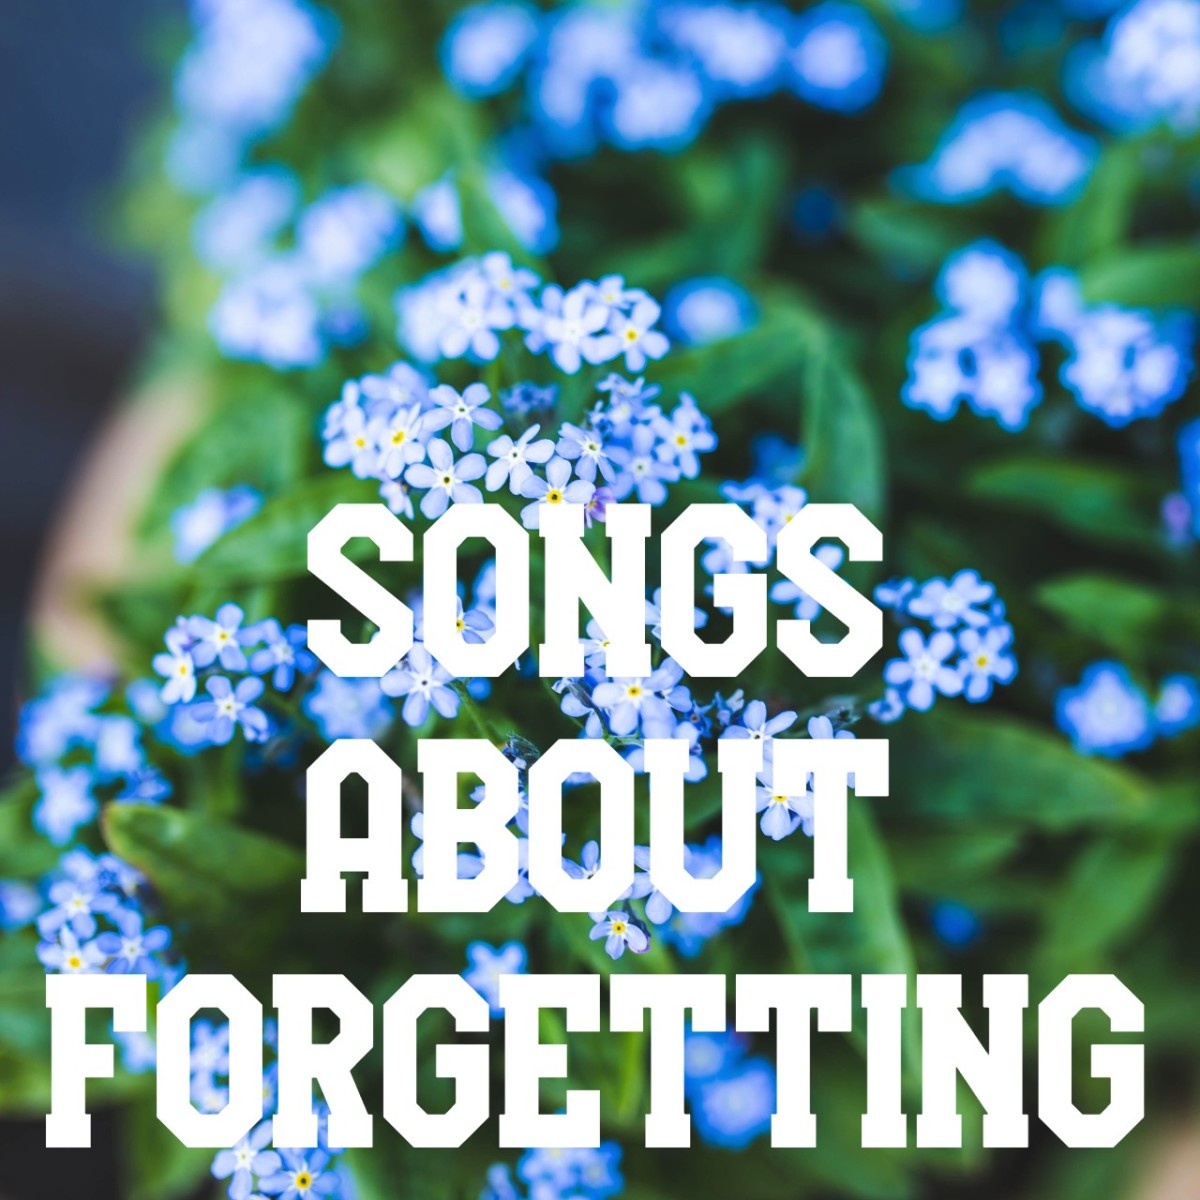 If you are trying to forget someone or something or if you are concerned about being forgotten, then make a playlist of pop, rock, country, and R&B tunes about forgetting.